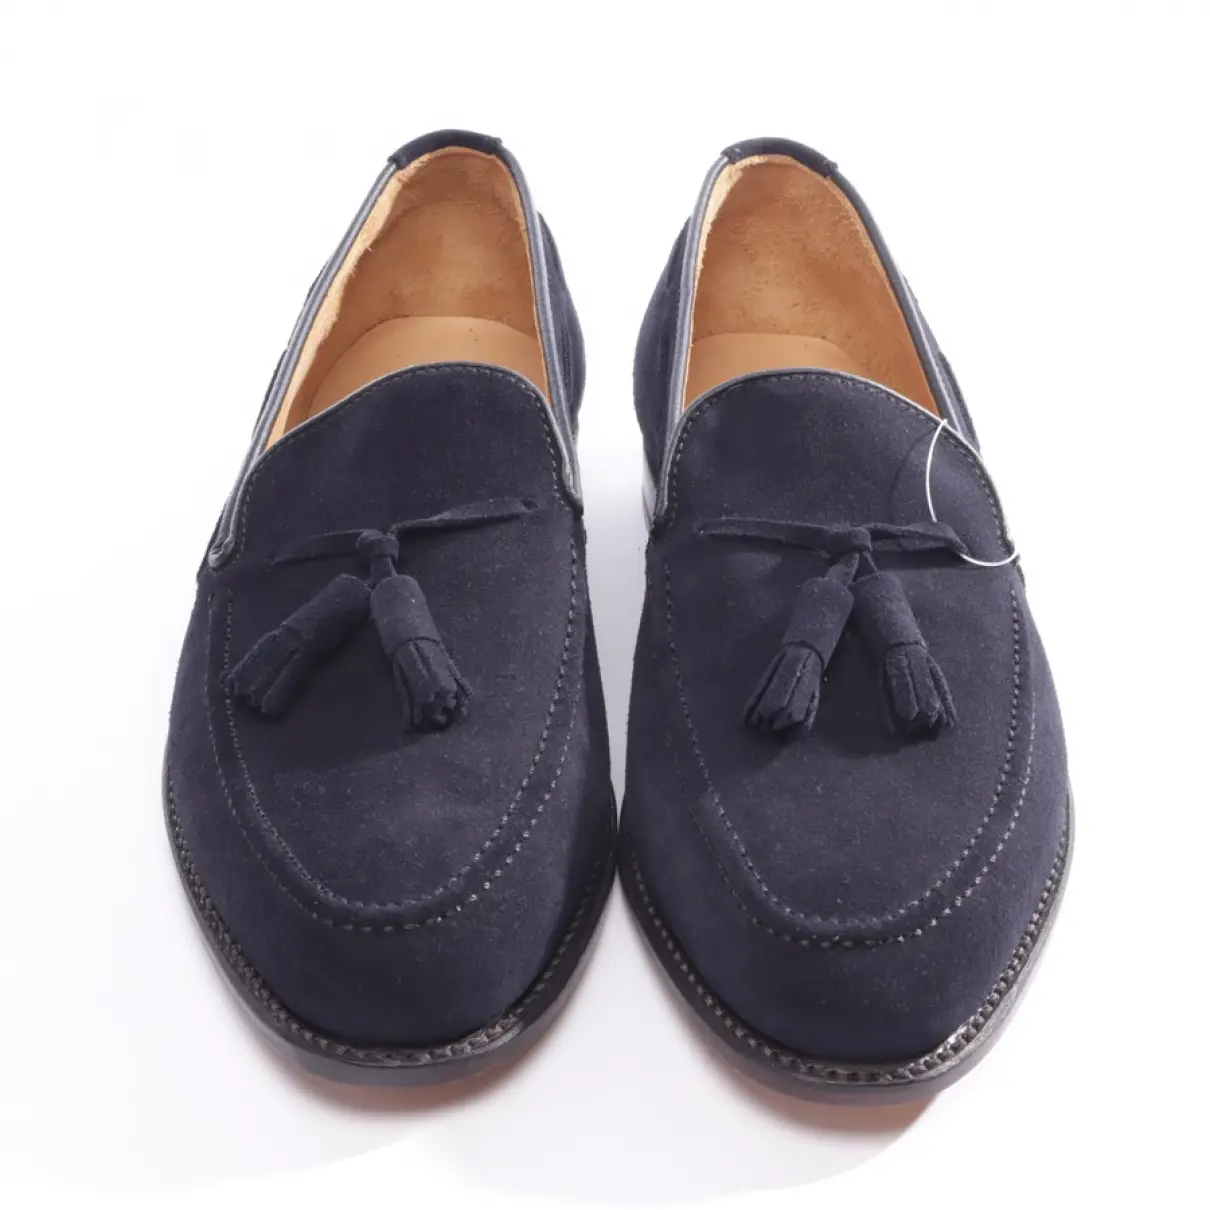 Buy Ludwig Reiter Leather flats online